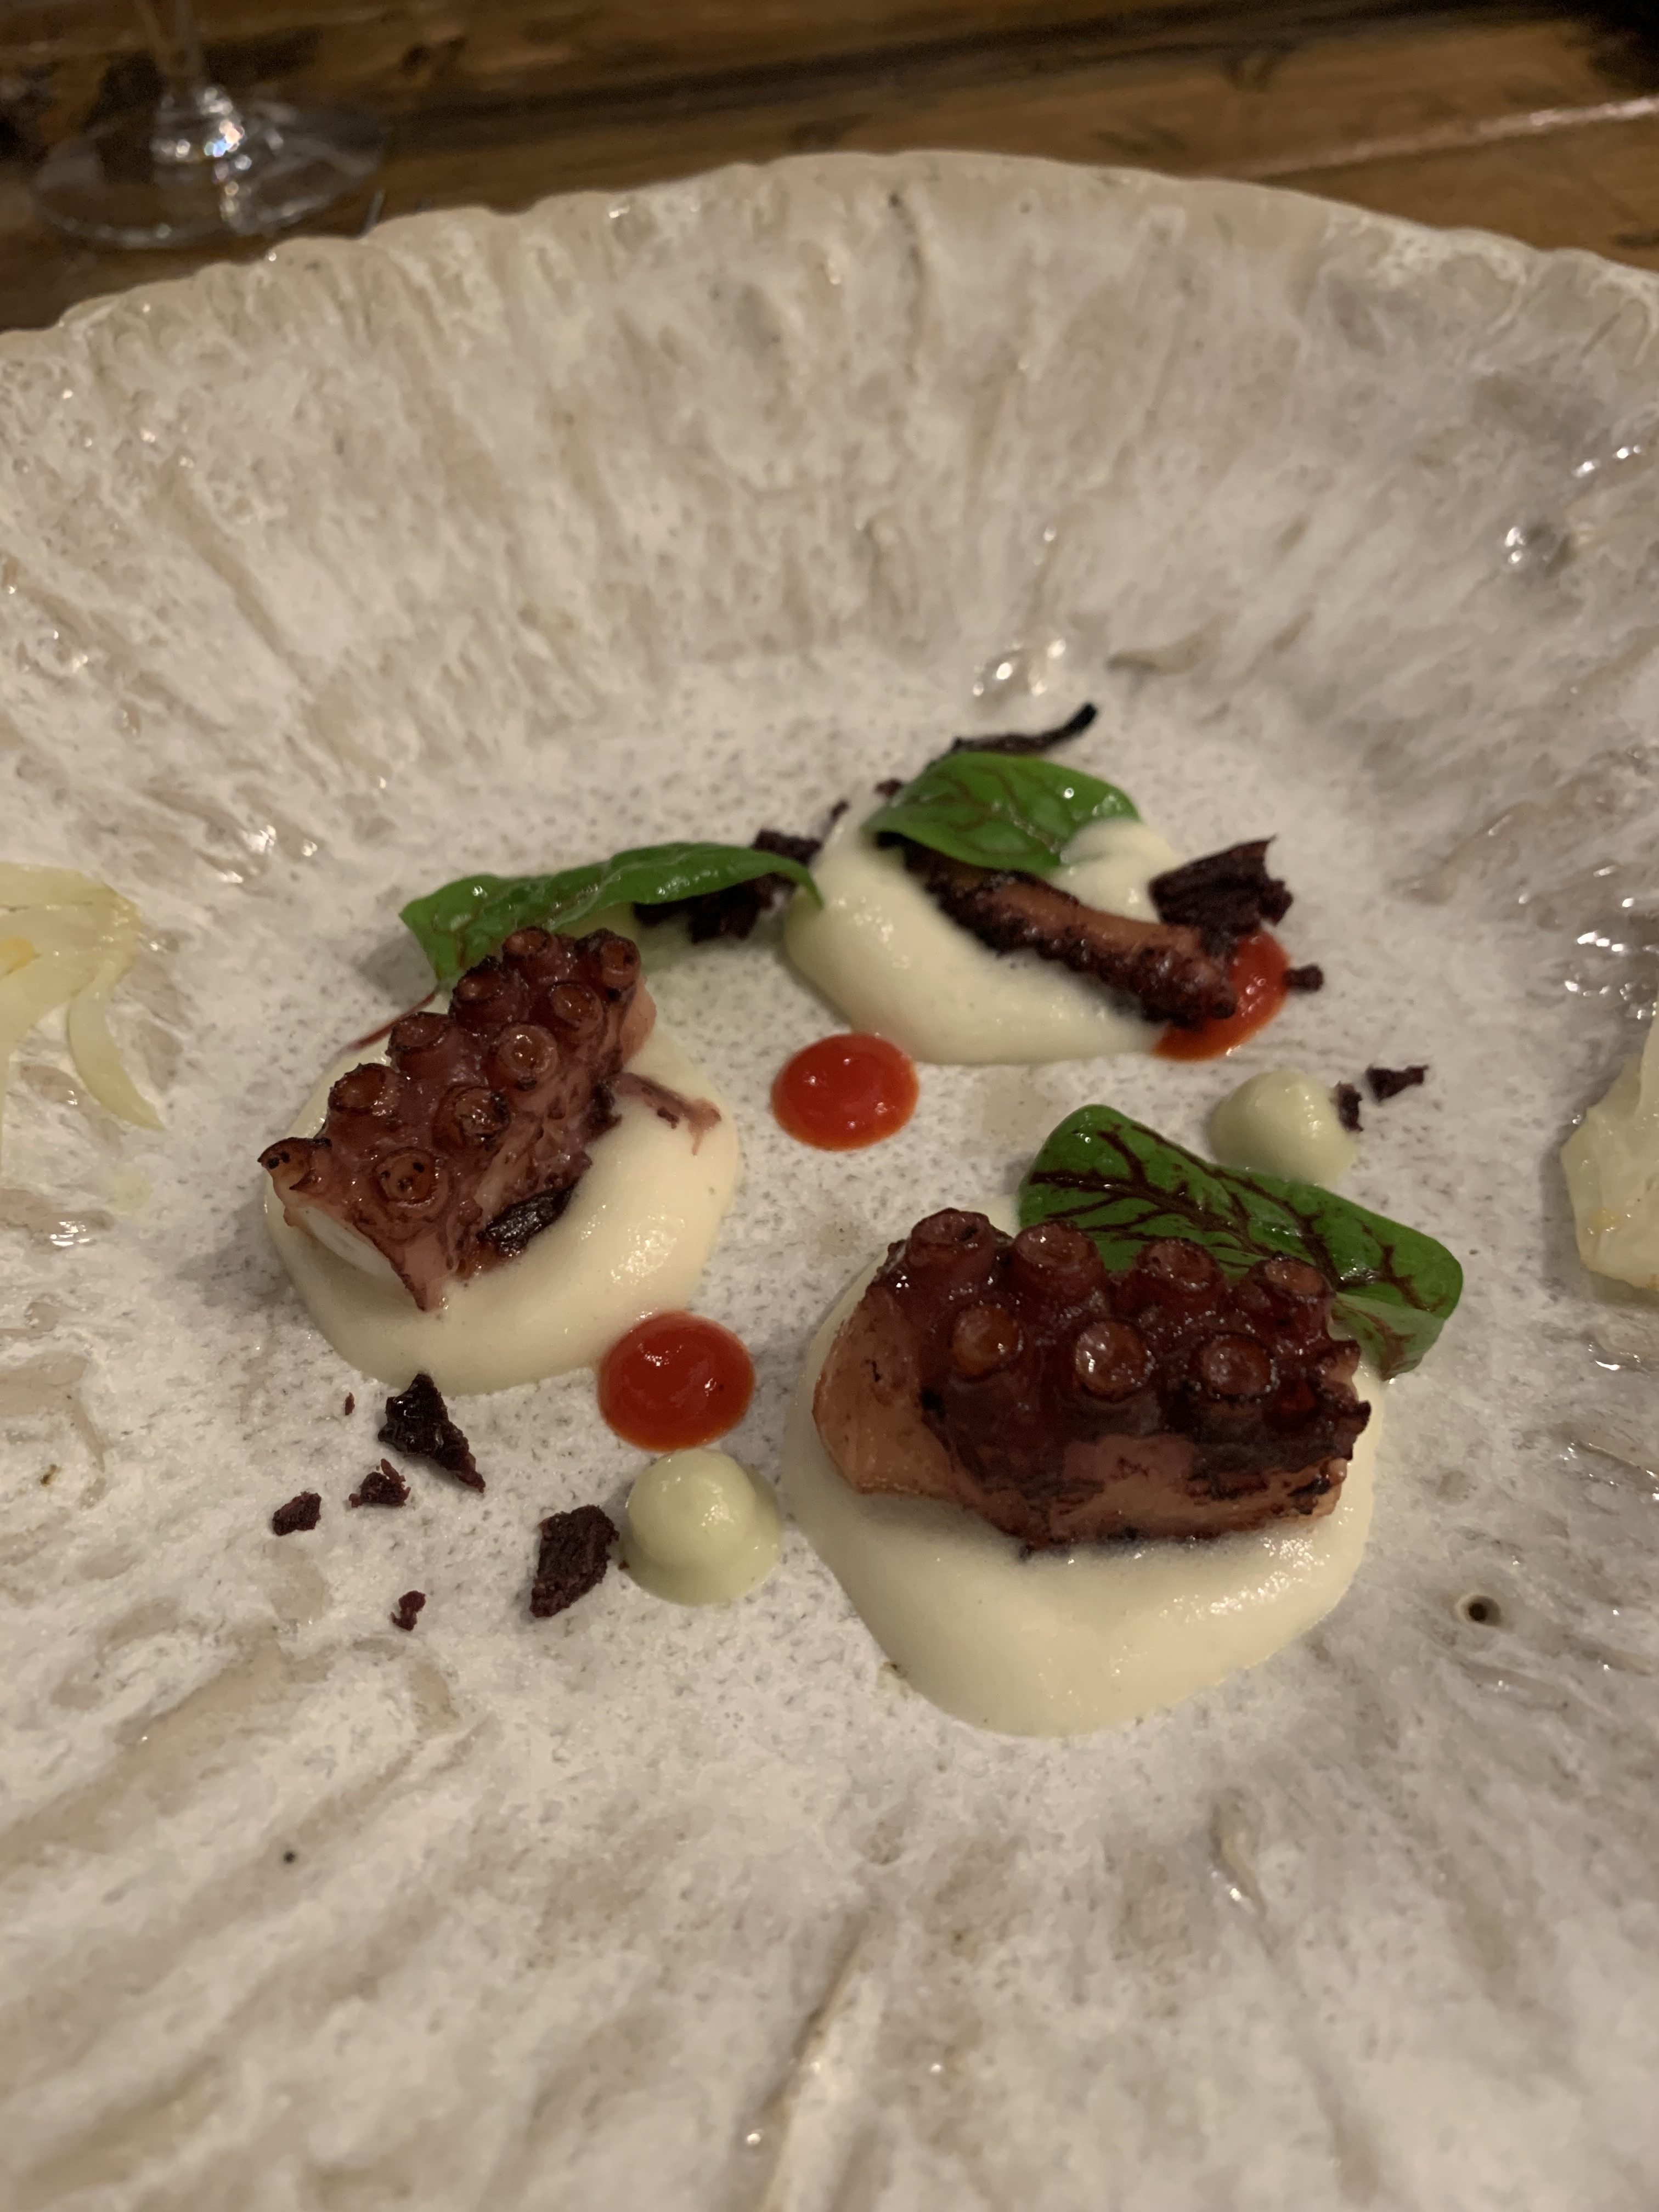 Chunks of octopus tentacle on their own dollop of white foam, with red dots and some greens scattered around the plate too